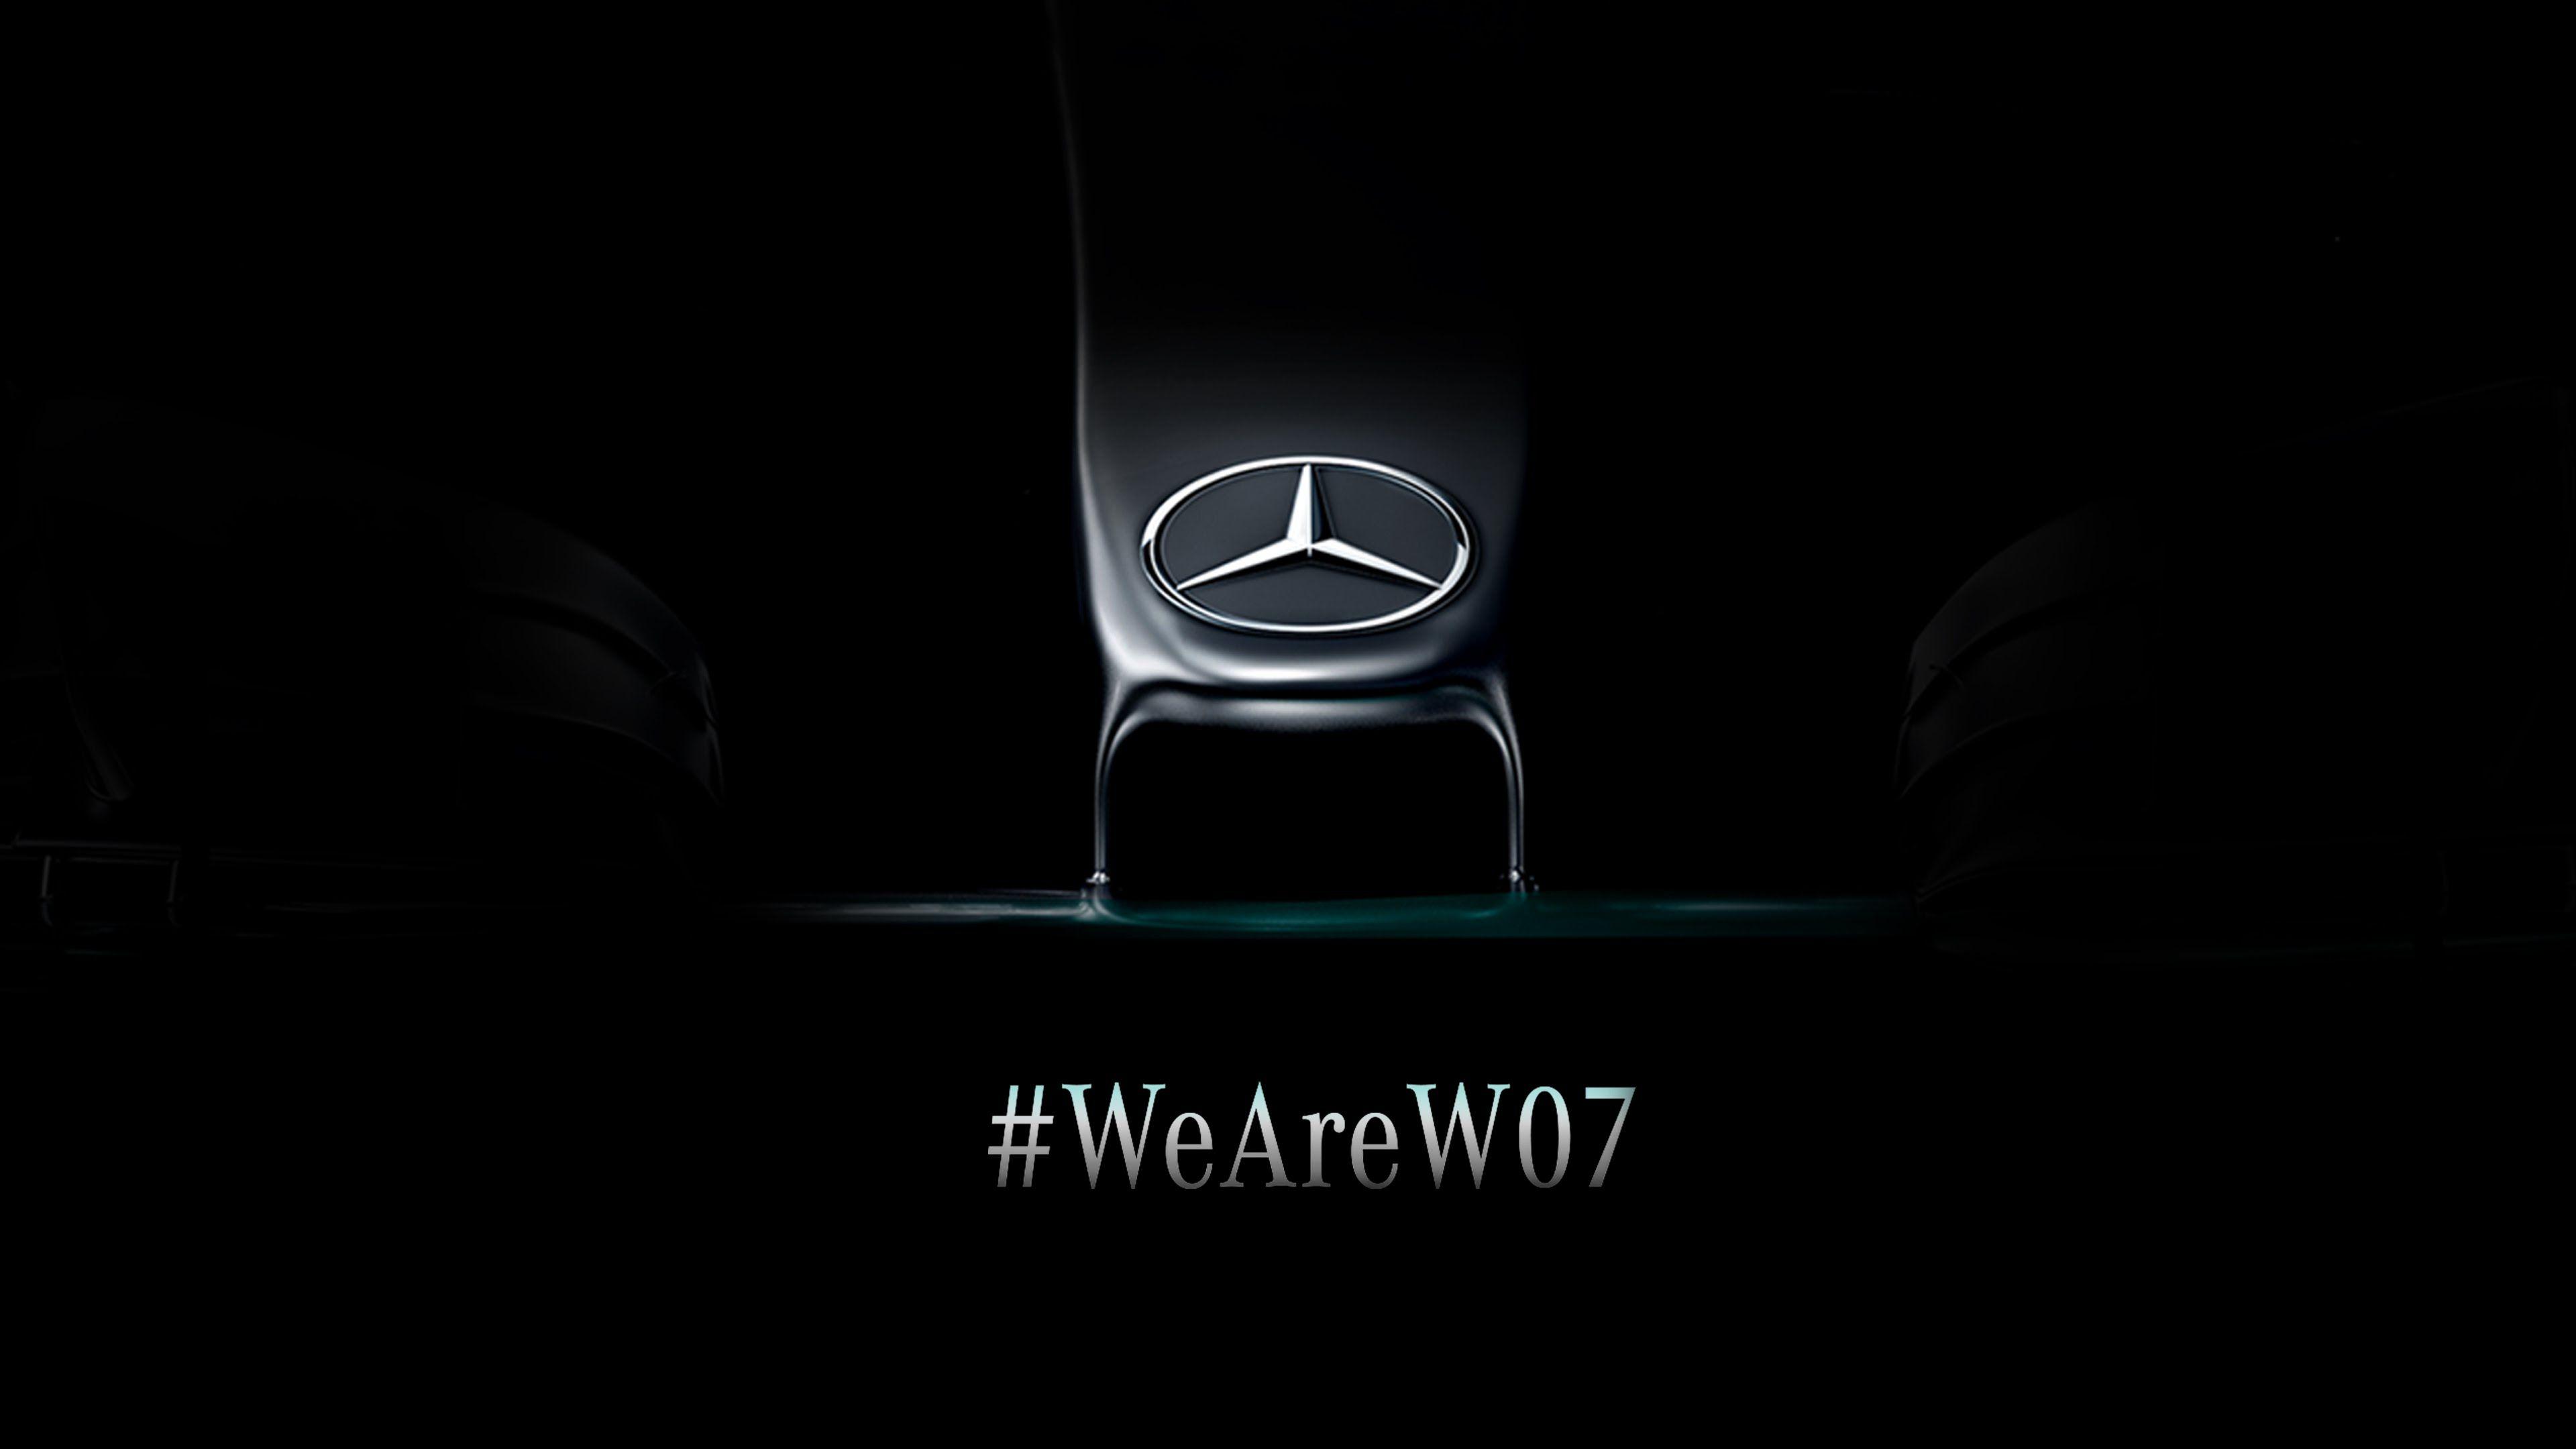 Introducing the W07